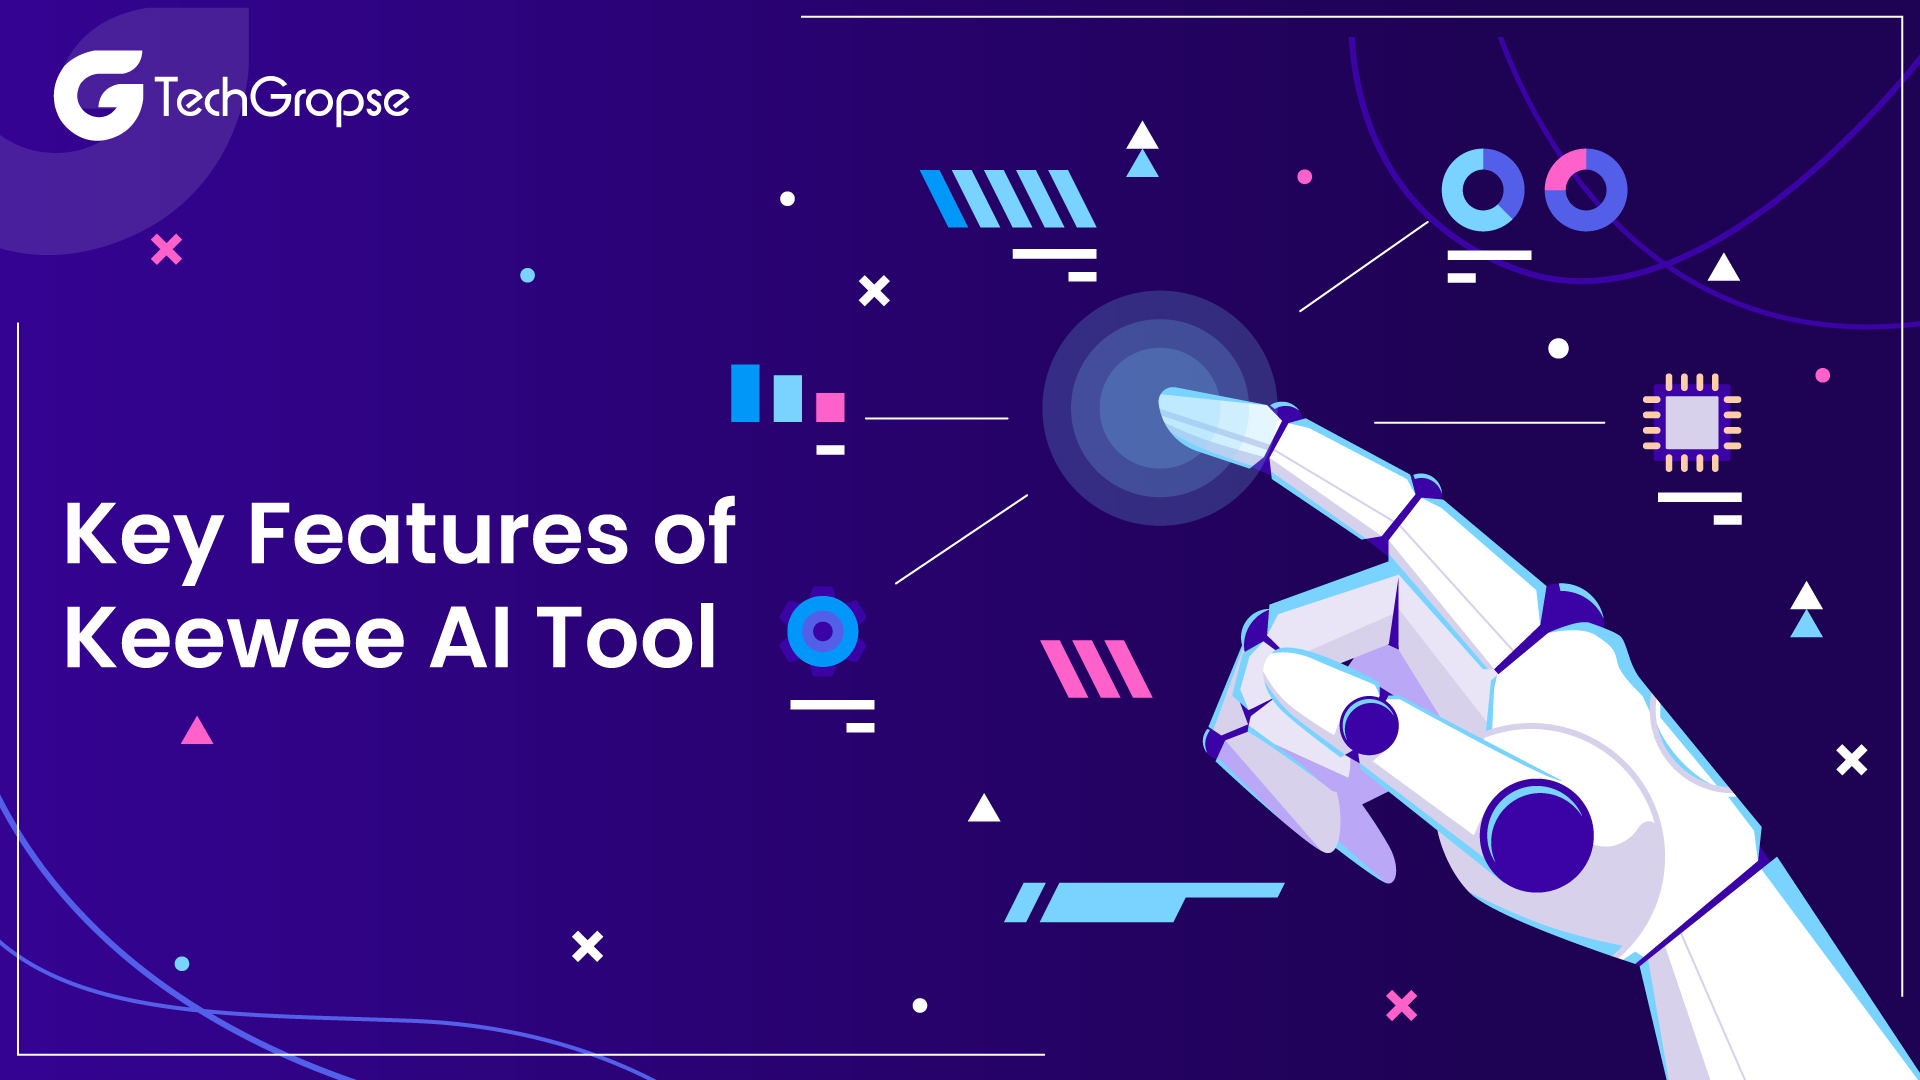 Key Features of Keewee AI Tool